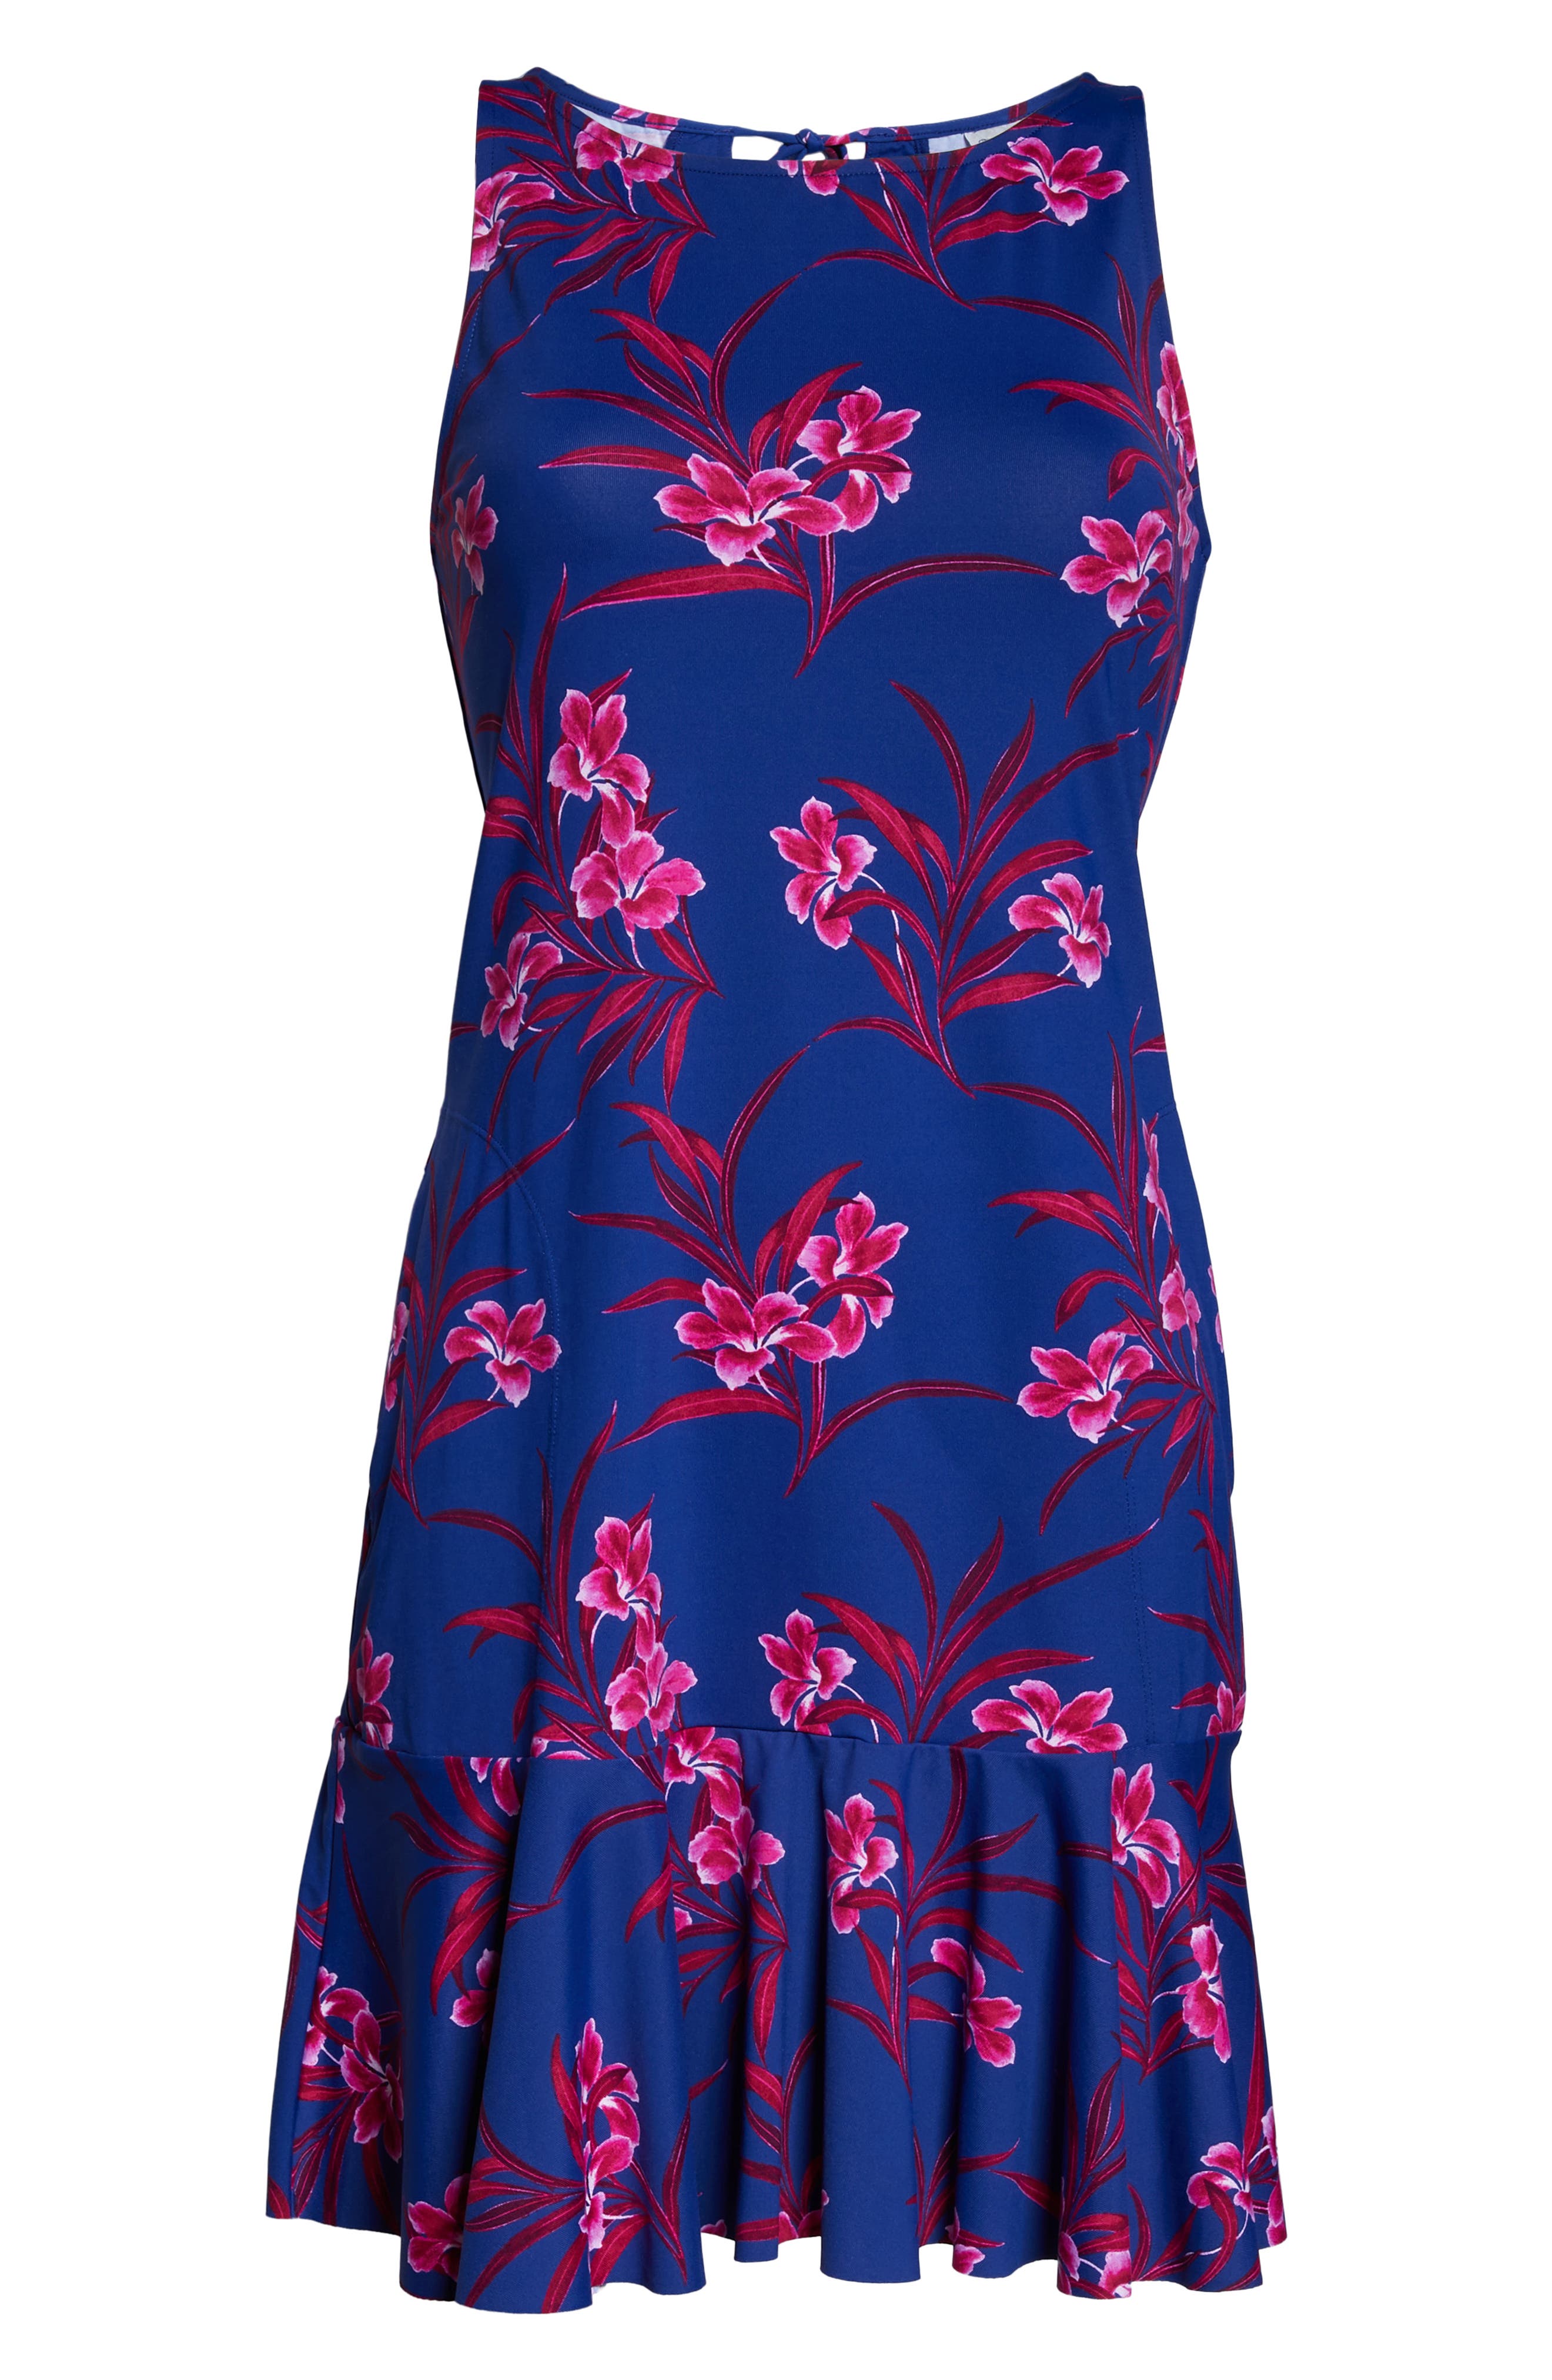 Tommy Bahama | Oasis Blossoms Spa Cover-Up Dress | Nordstrom Rack